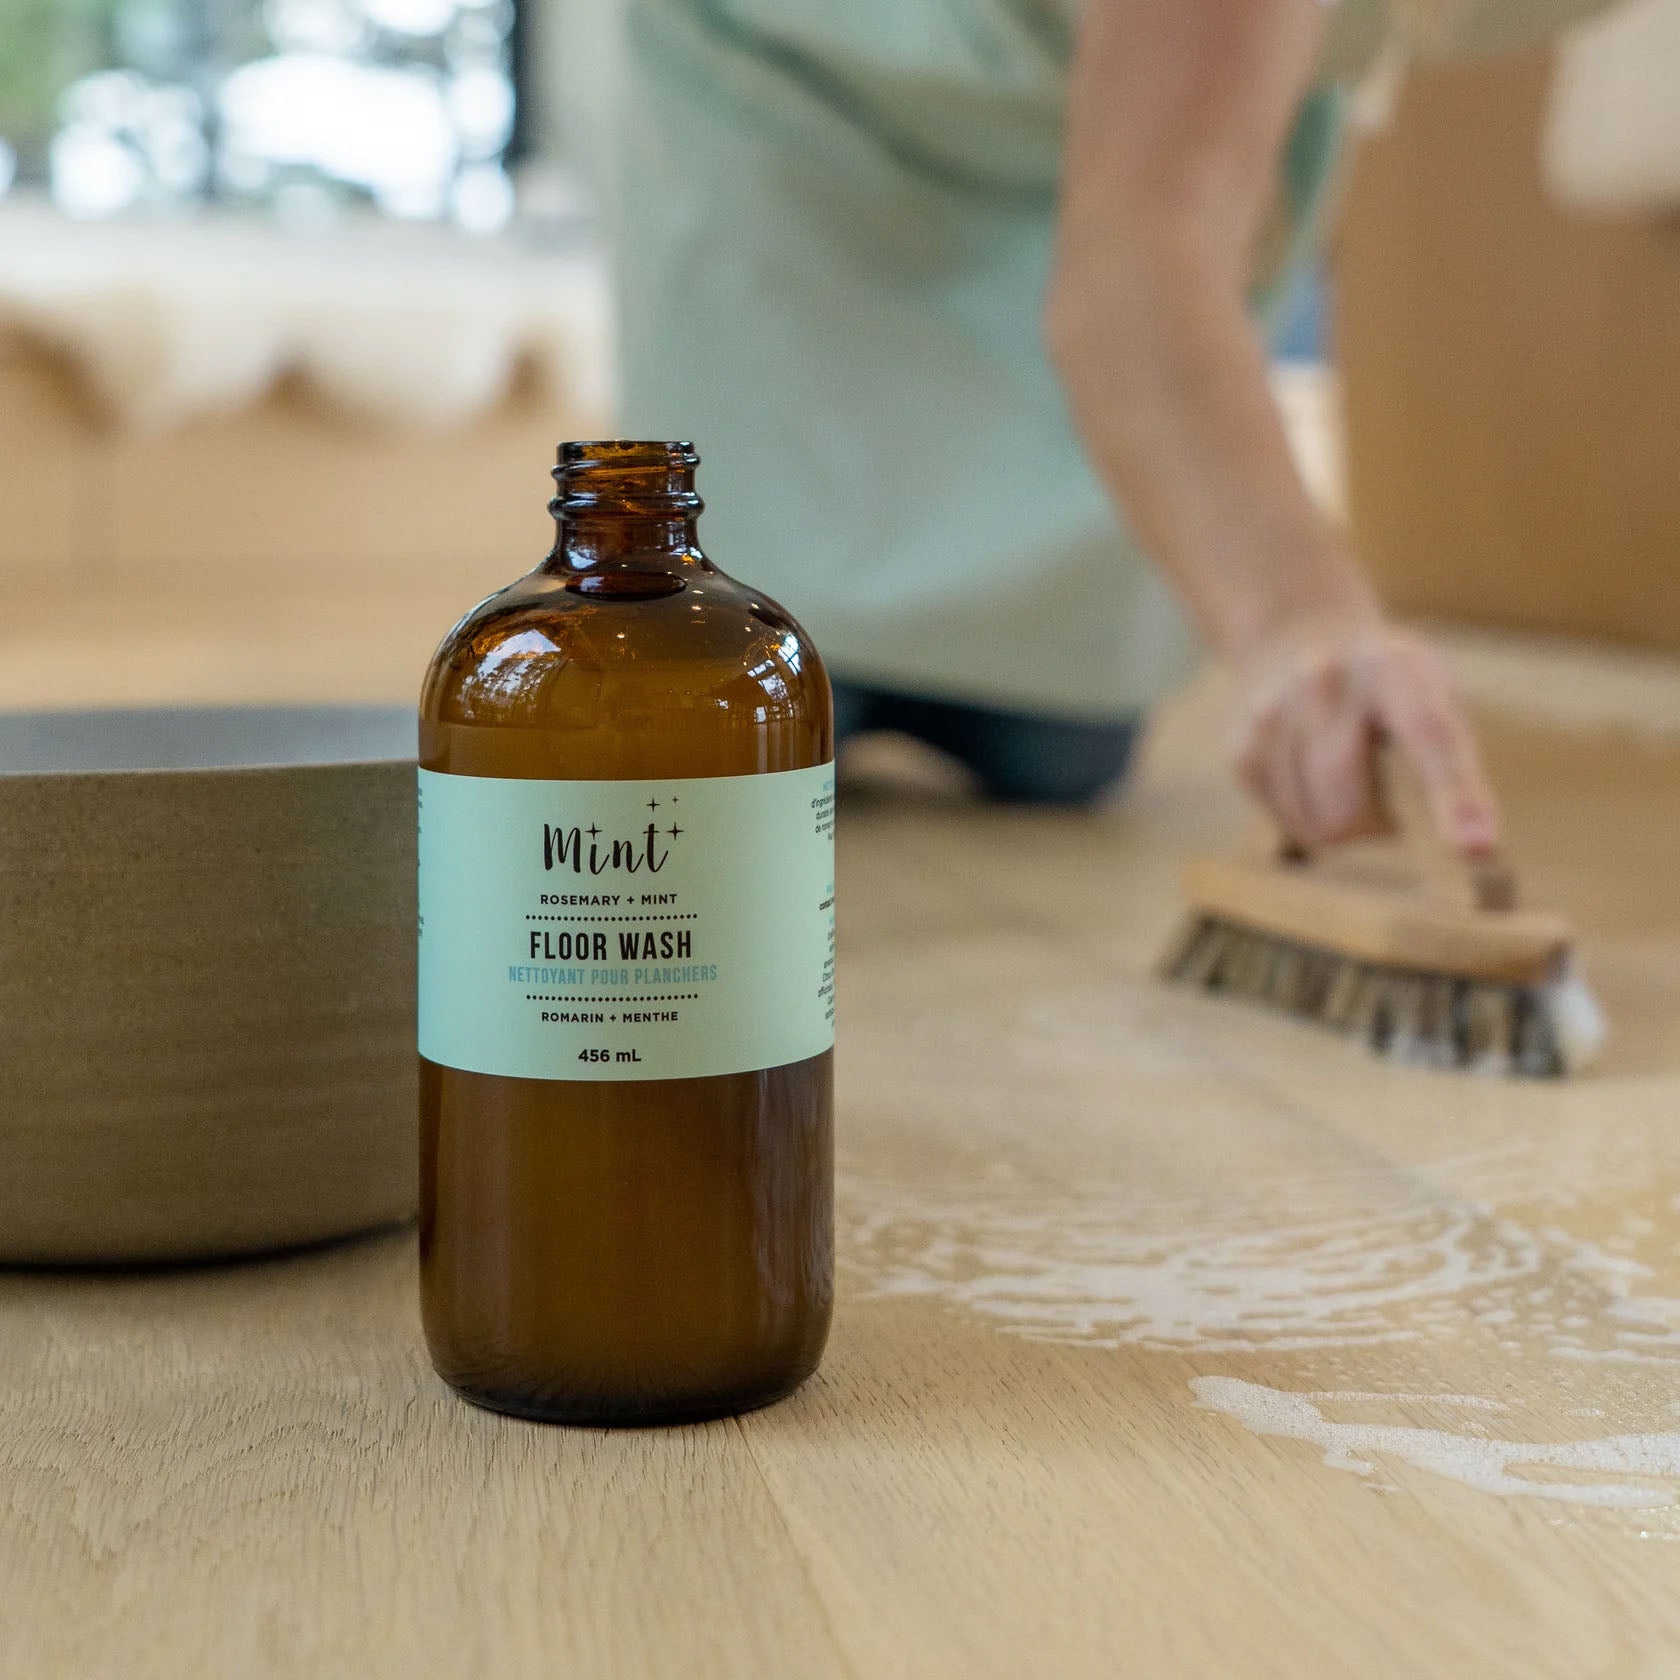 Mint Floor Wash is a concentrated formula that is tough on dirt and odours and leaves a lasting streak free shine. Made with 100% all natural plant based ingredients that is safe to use on all floor types. Scented with pure organic Essential Oils of Rosemary, Mint and Orange that will leave your entire room smelling fresh and clean.